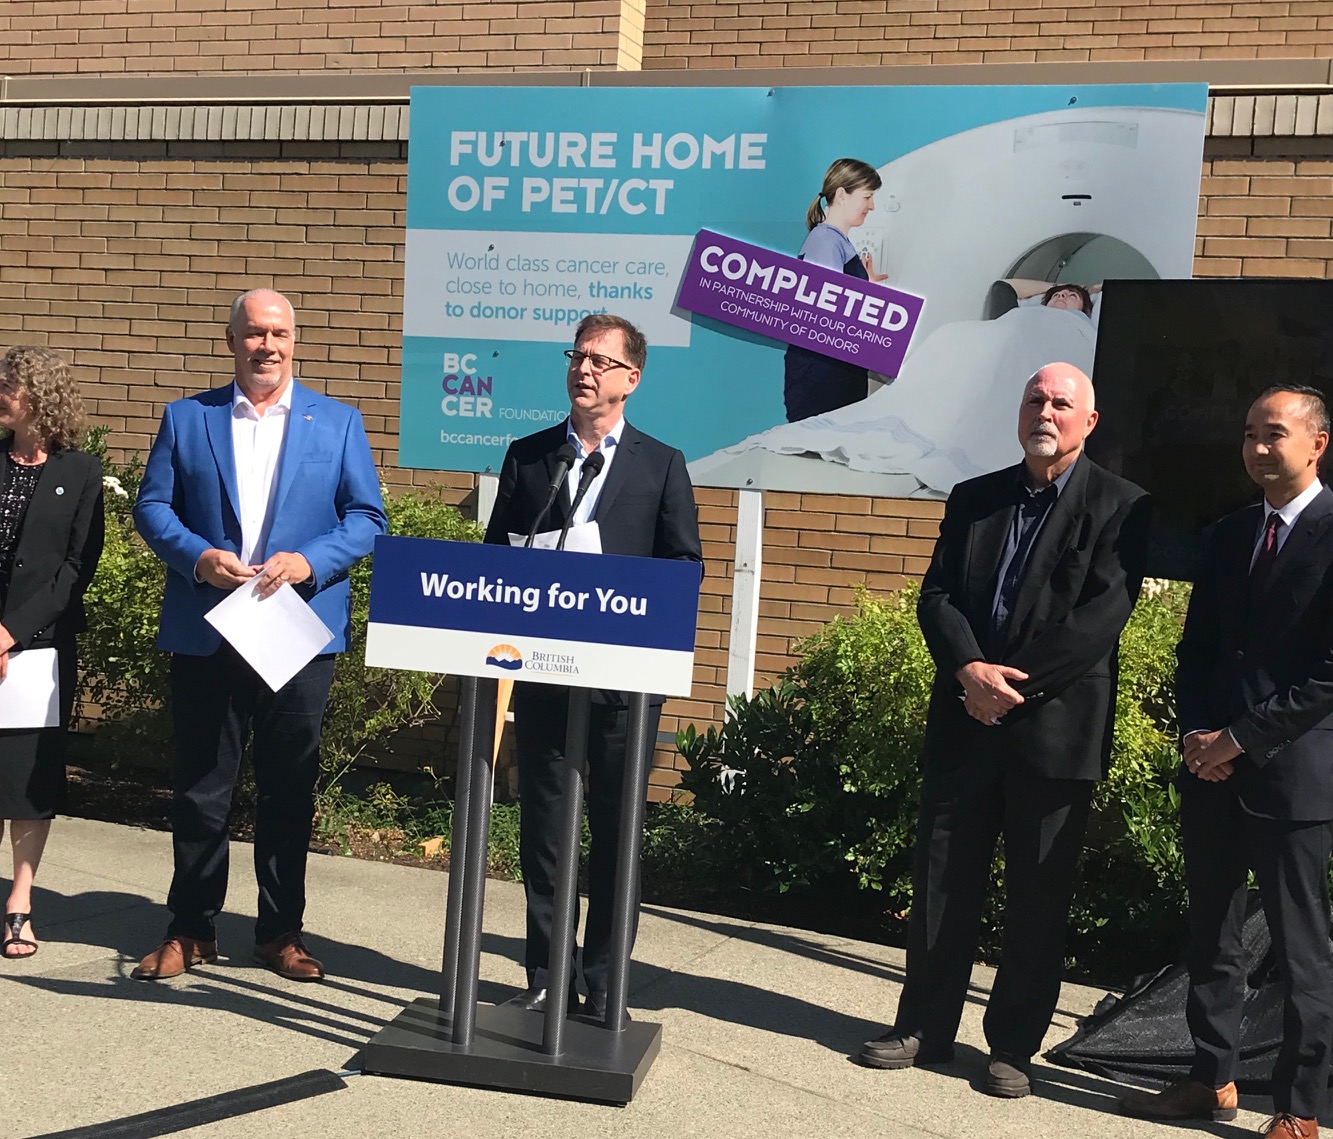 John Horgan, Adrian Dix, Gerard Young and Dr. Kim Nguyen Chi at the BC Cancer PET/CT Scanner announcement in Victoria, BC